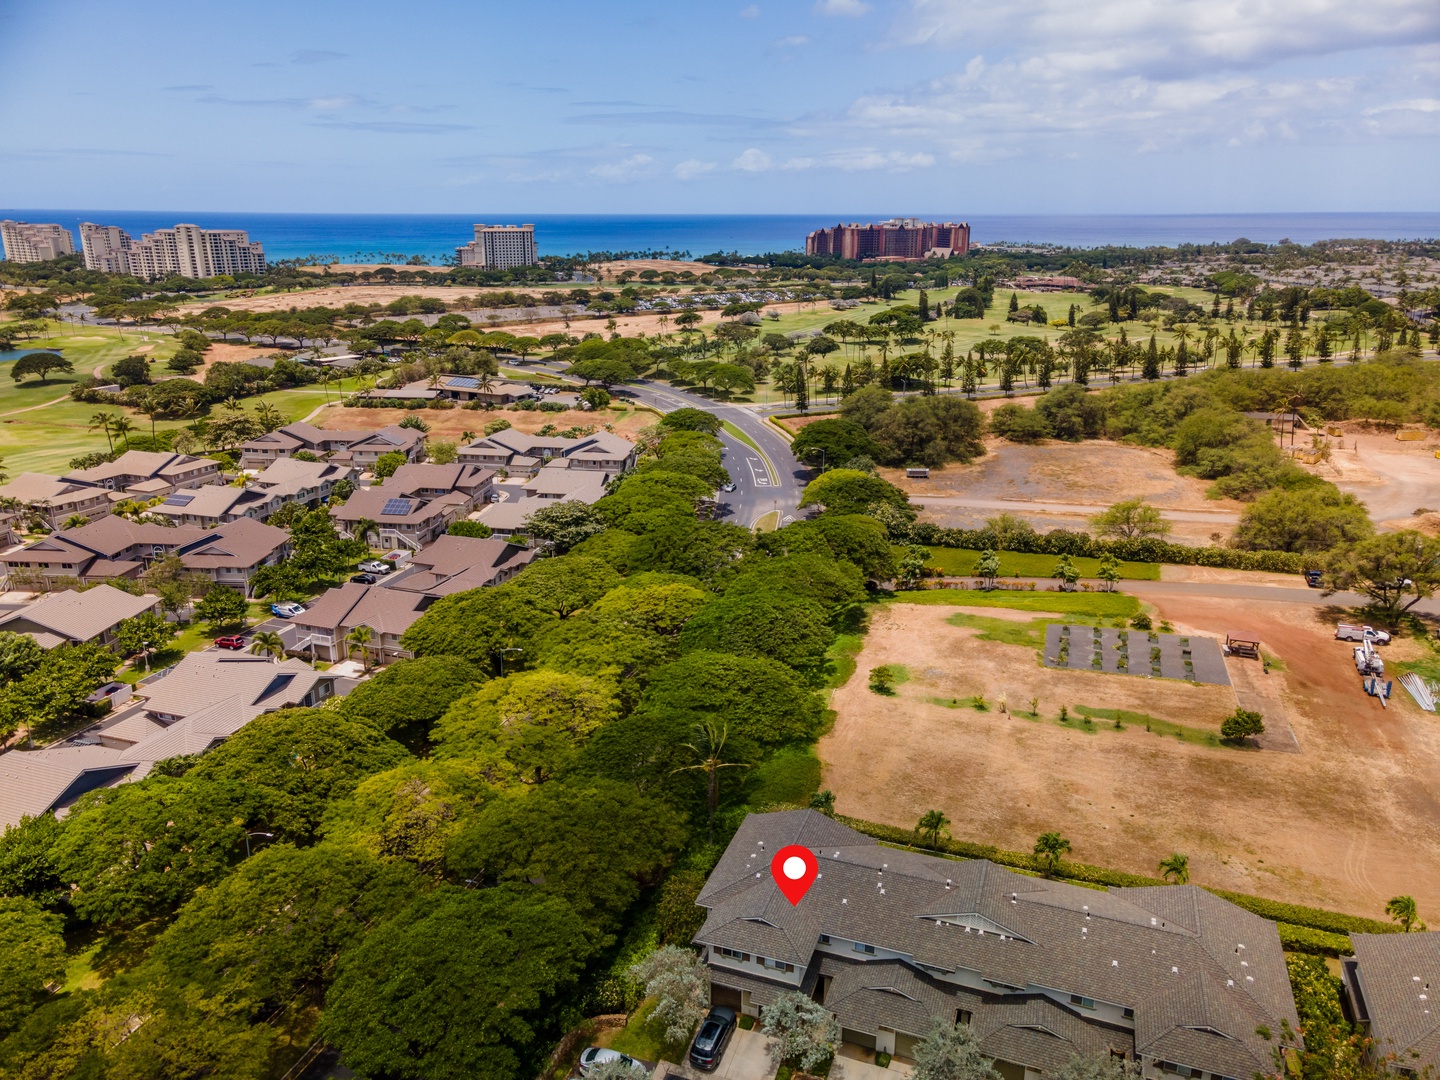 Kapolei Vacation Rentals, Hillside Villas 1496-2 - An expansive look over the island and sea.